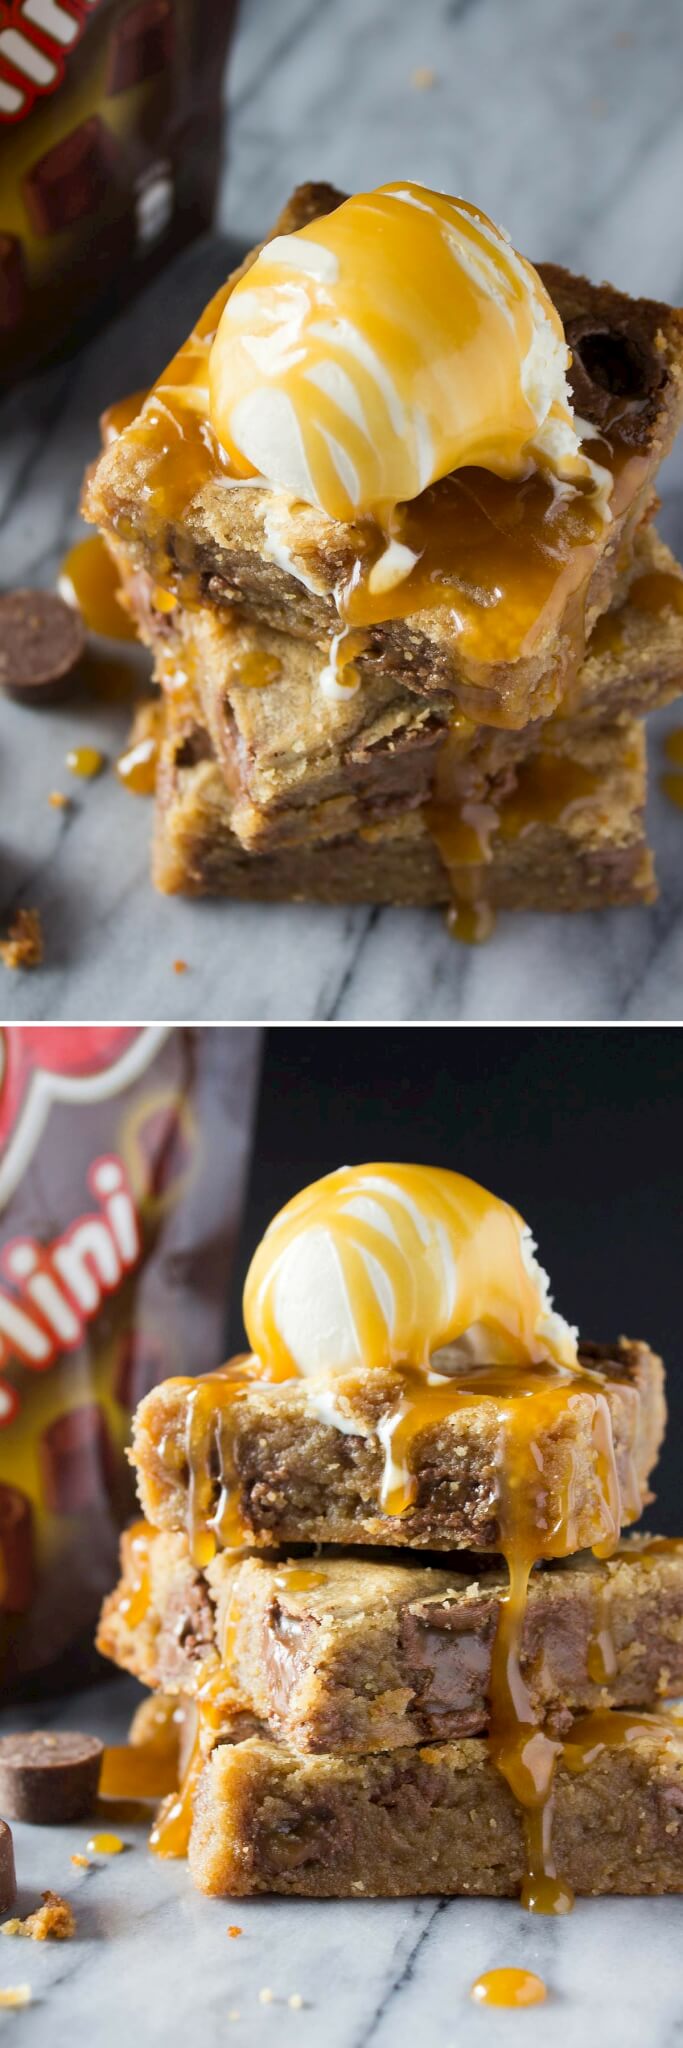 Fudgy, gooey Peanut Butter Caramel Blondies. Because with lots of peanut butter, Rolo candies, caramel sauce, no mixer & only 1 bowl - you need to make these!